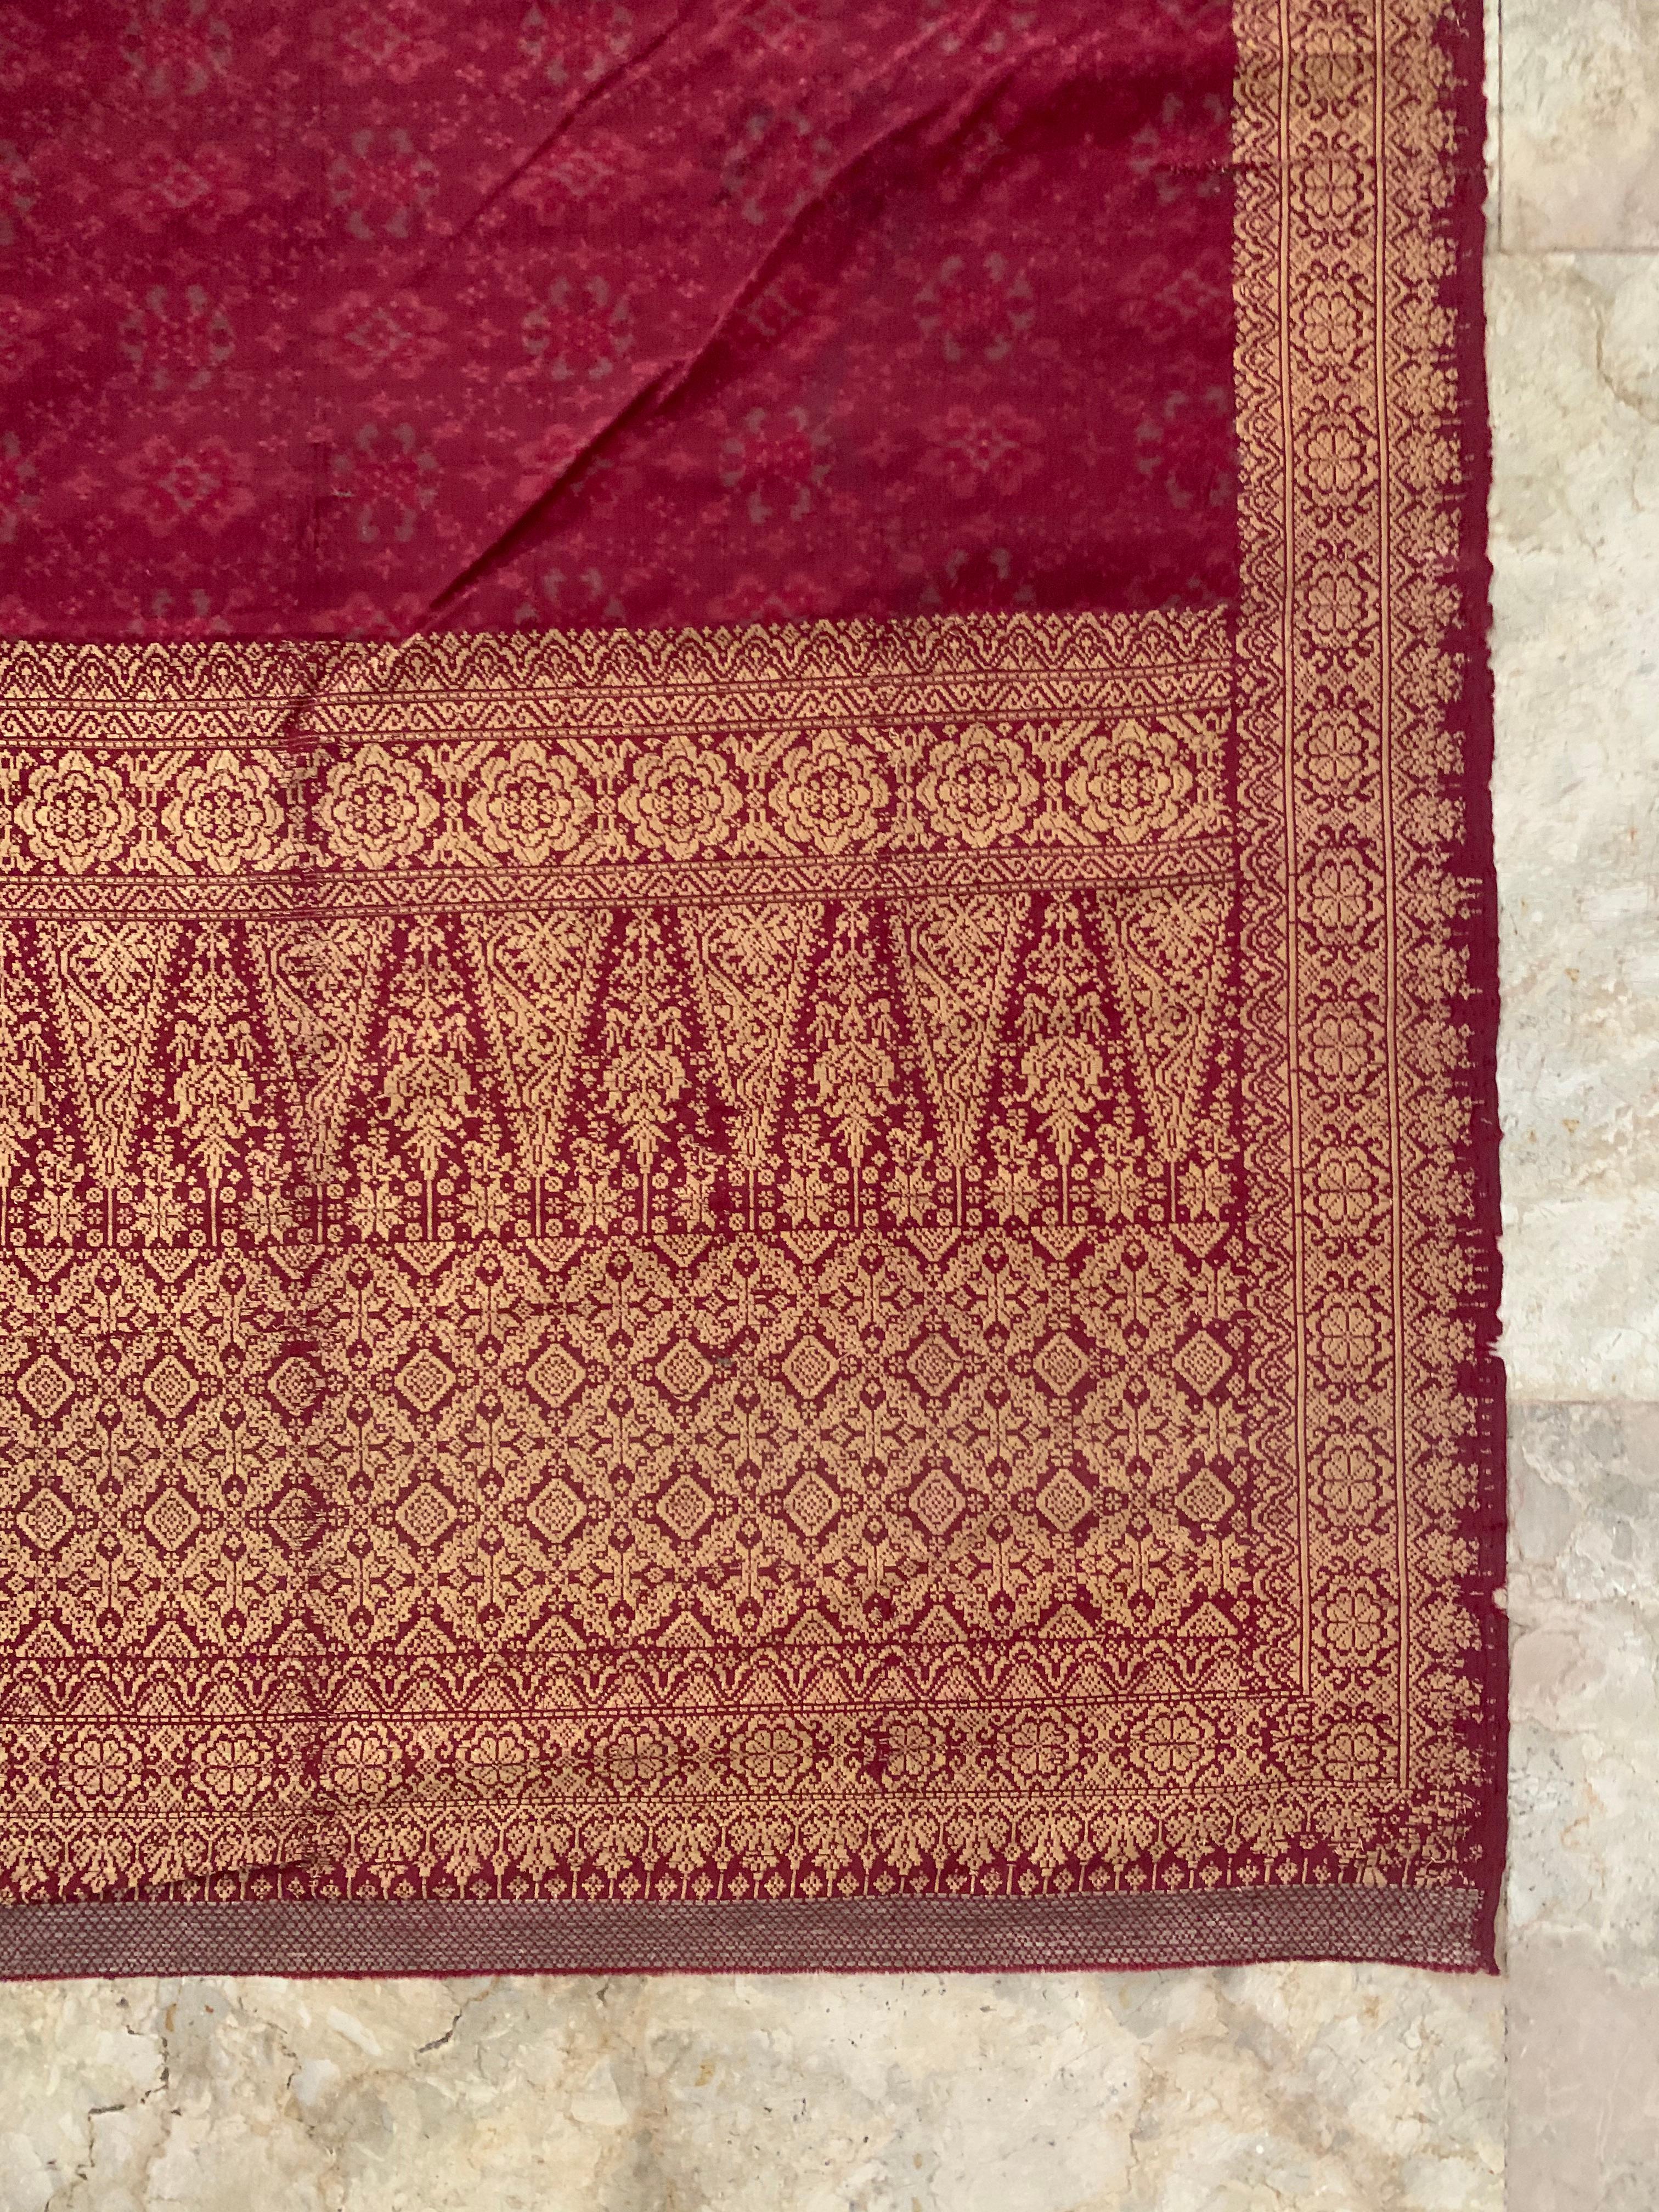 Ceremonial Silk Ikat from Sumatra with Stunning Motifs and Gold Leaf Detail 1